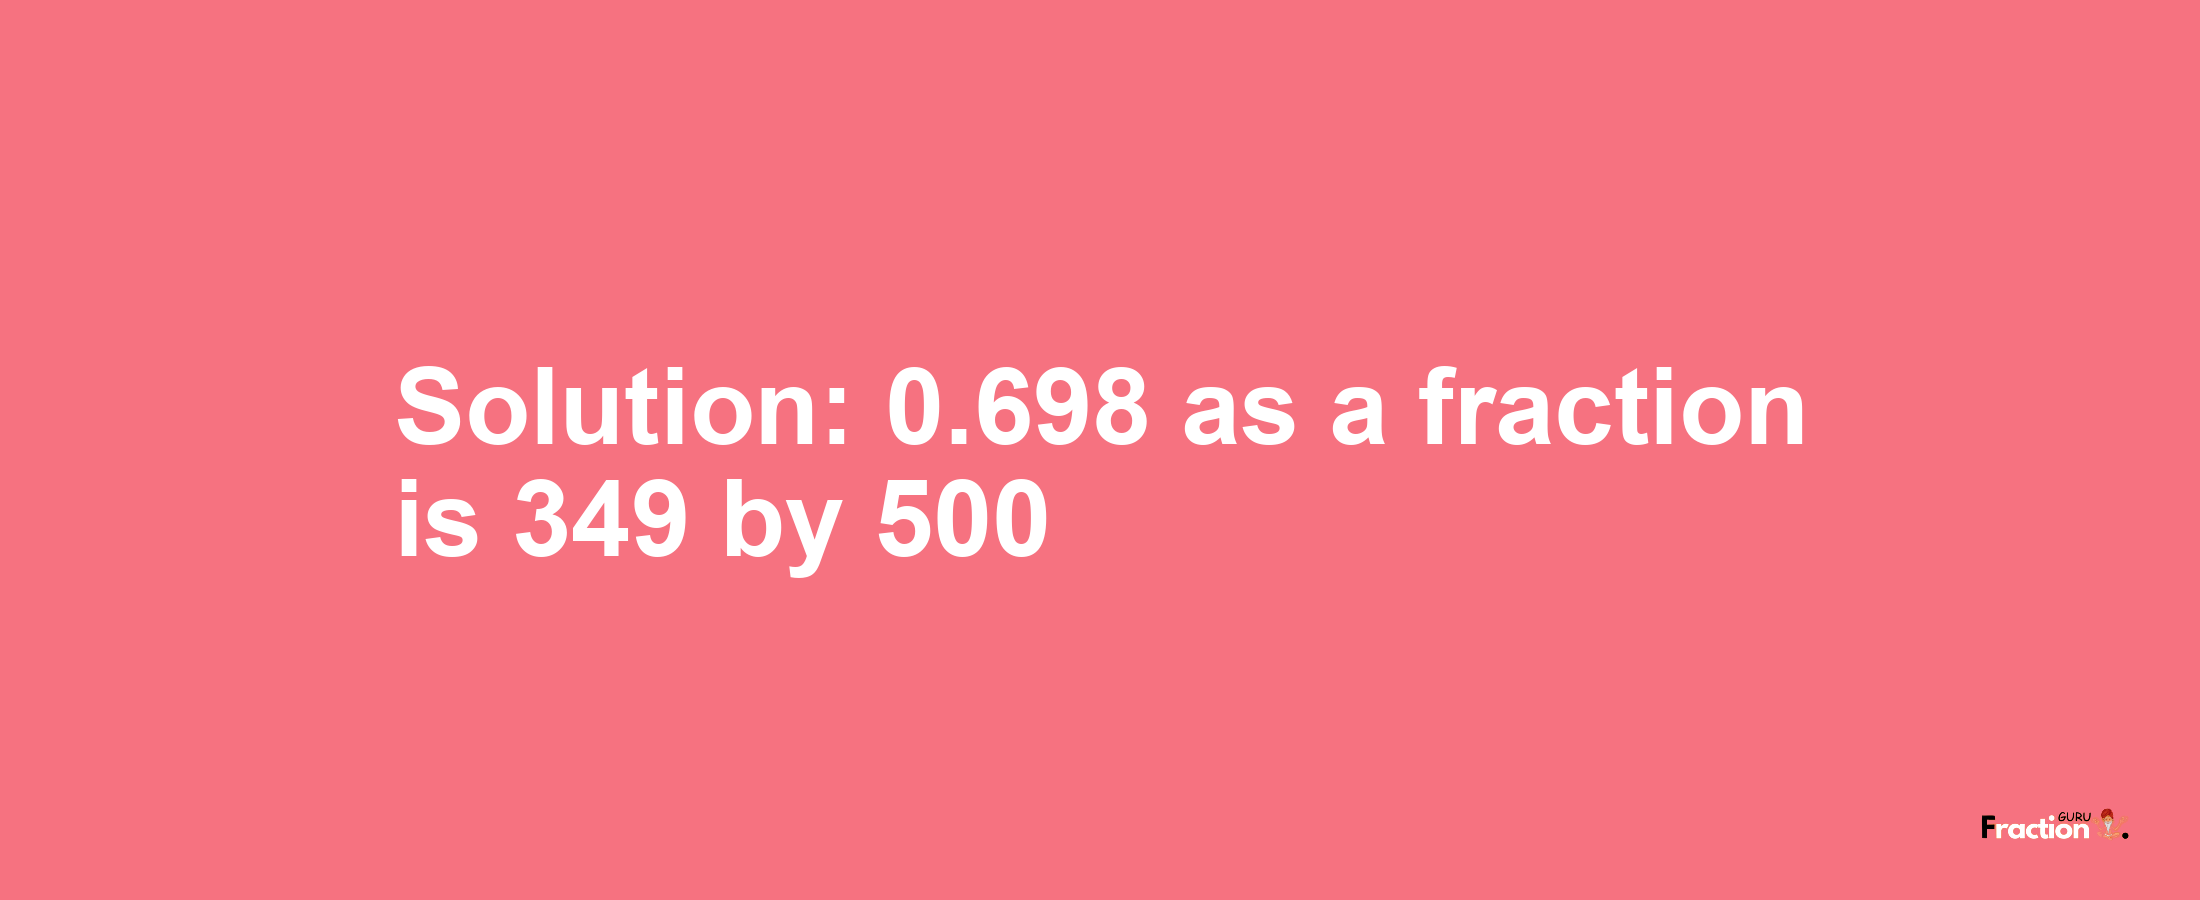 Solution:0.698 as a fraction is 349/500